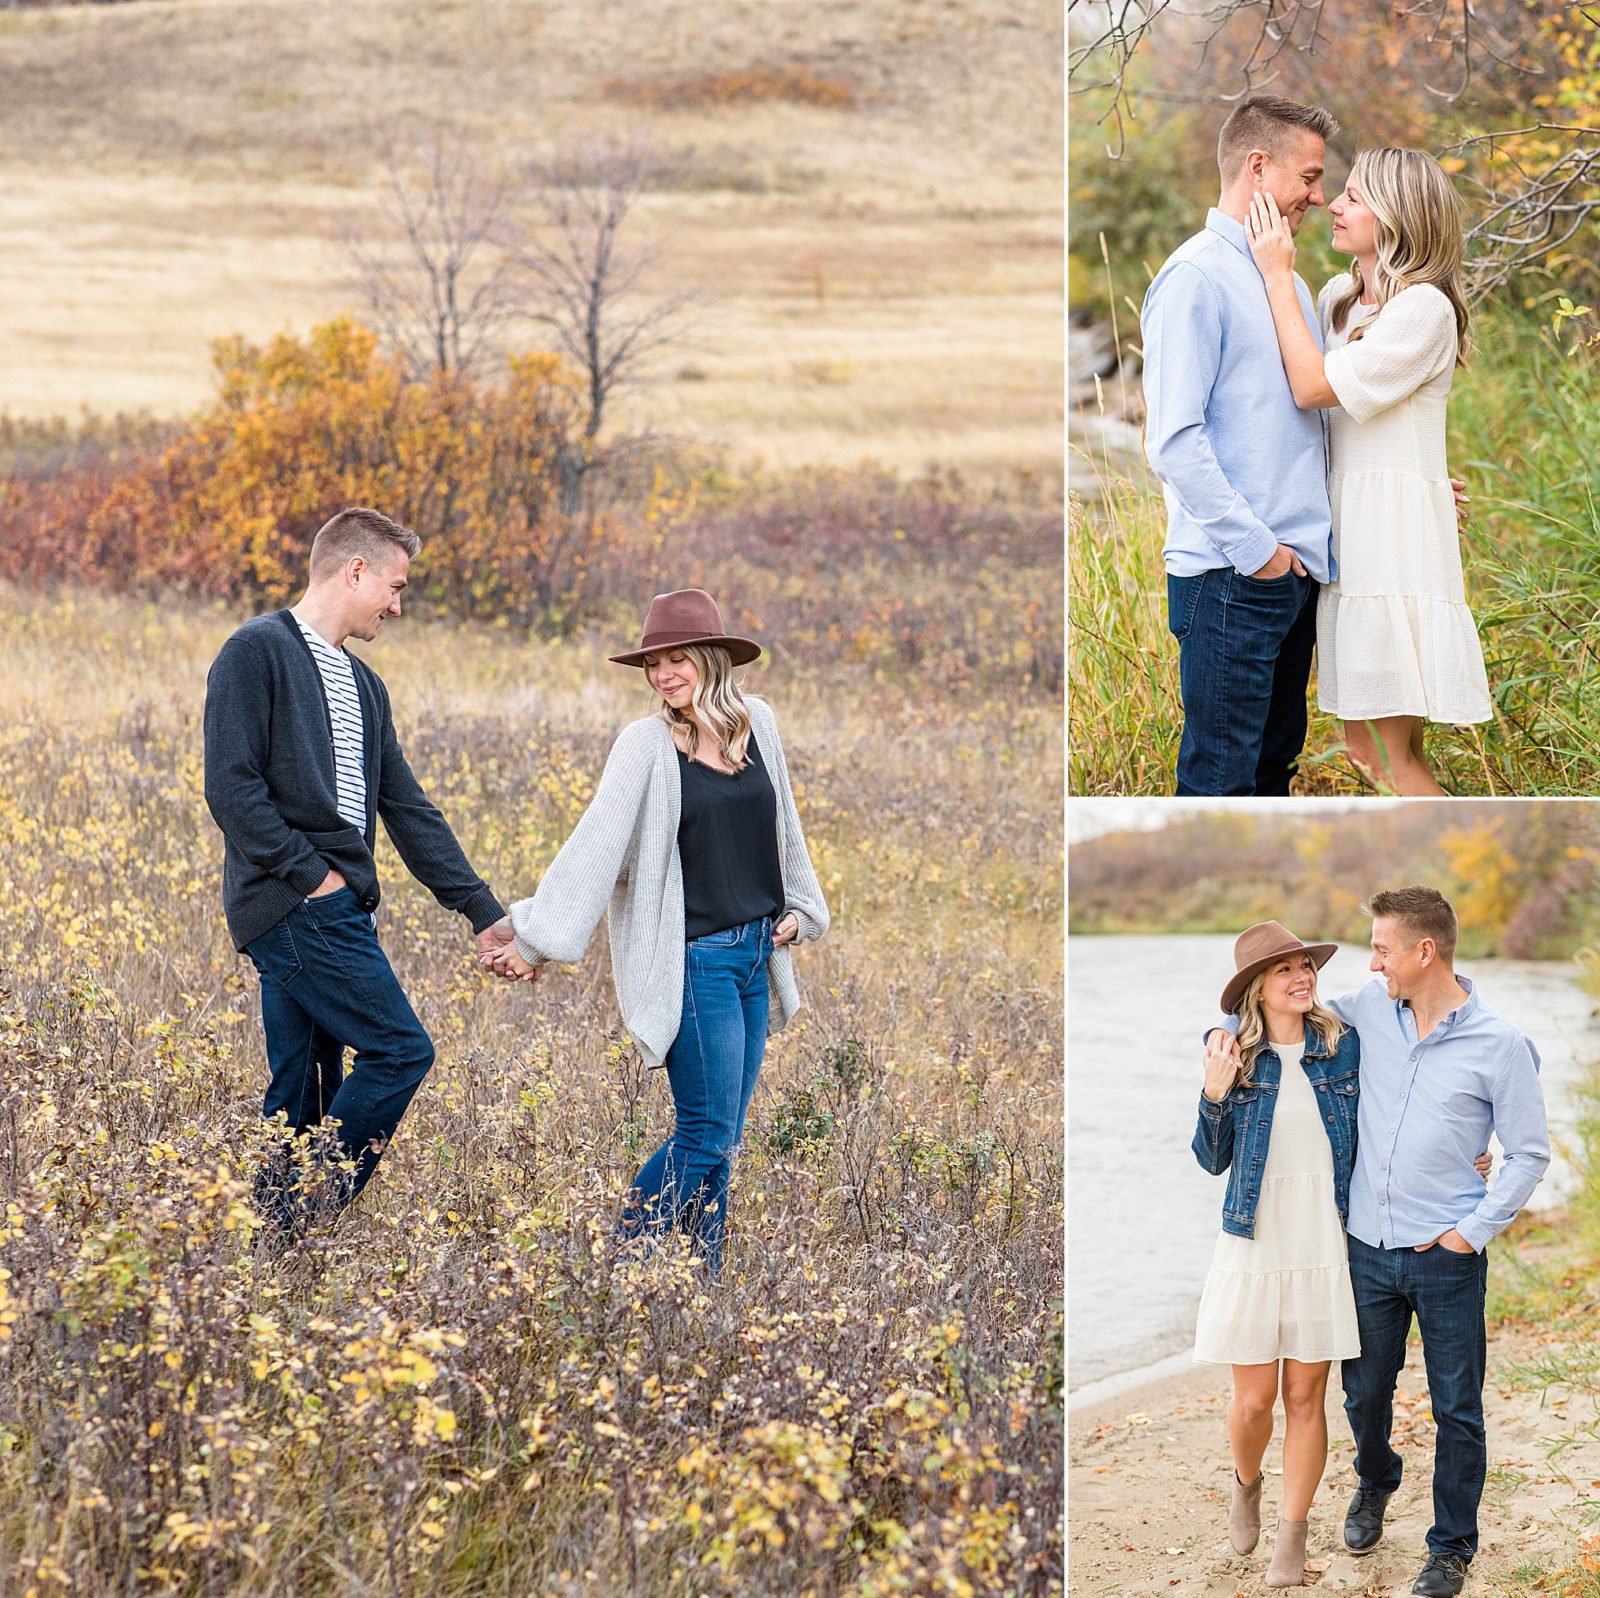 what to wear for couples photos - have more than one outfit for couples session in